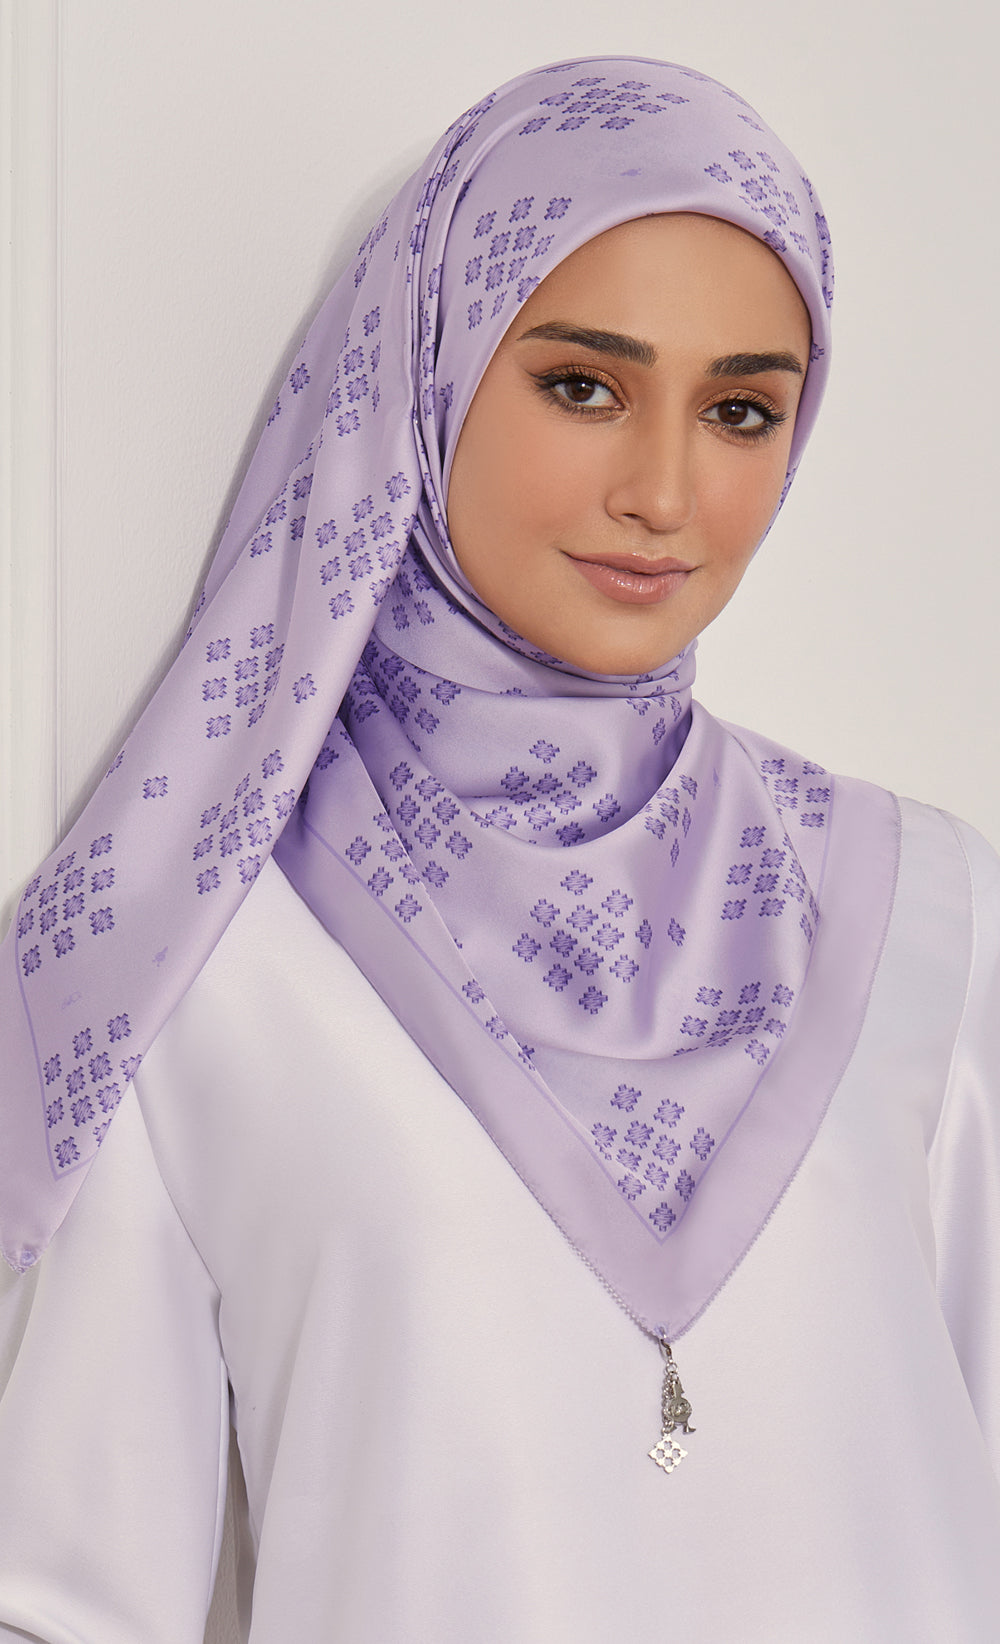 The Ikatan dUCk Square Scarf in Indah